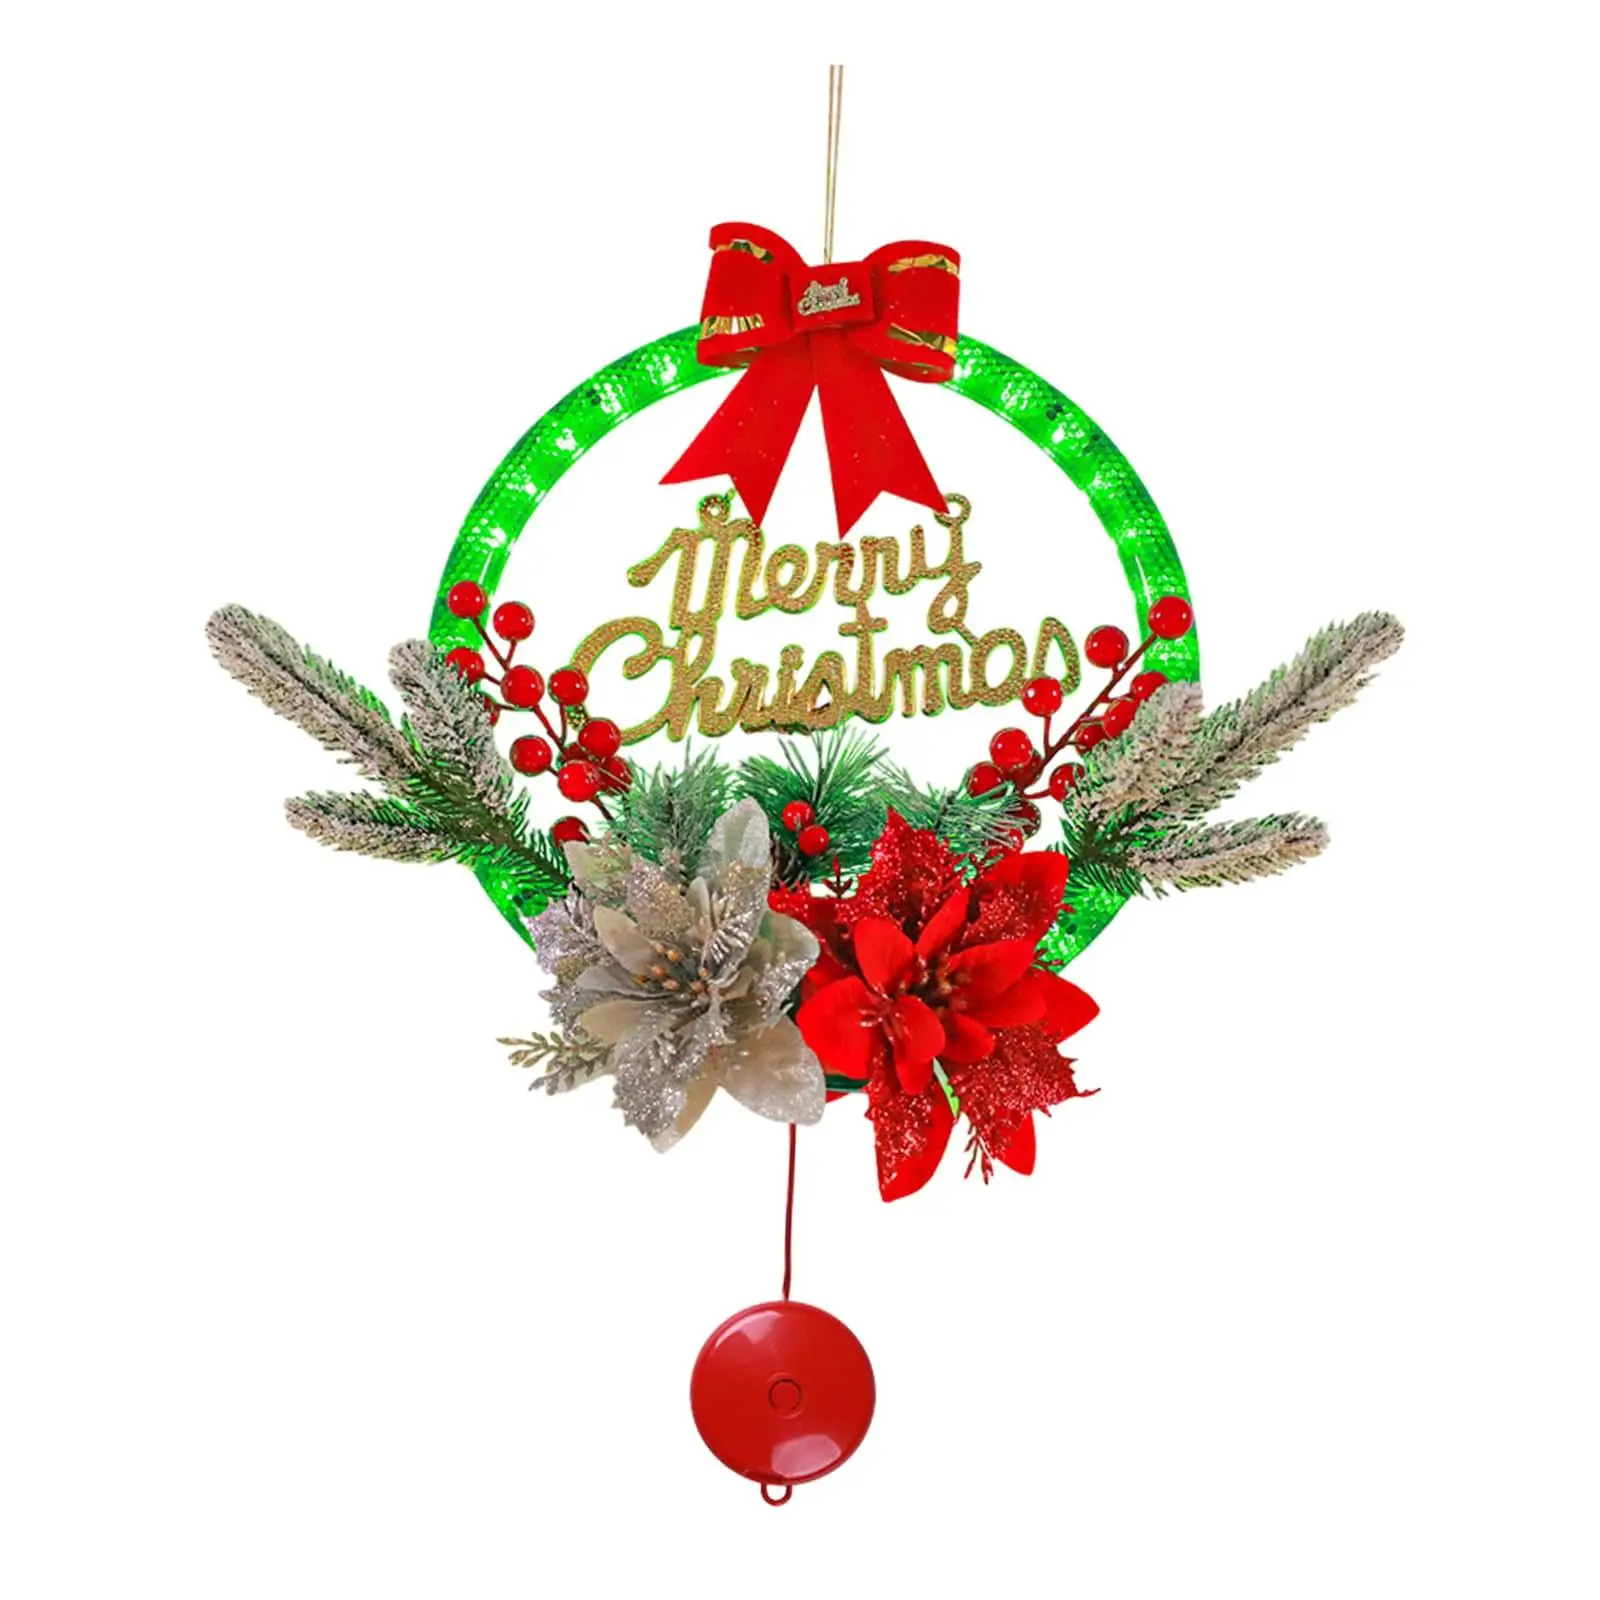 Light up Christmas Wreath Artificial Wreath Christmas Sign Wreath with Lights for Indoor Outdoor Window Porch Wall Decoration